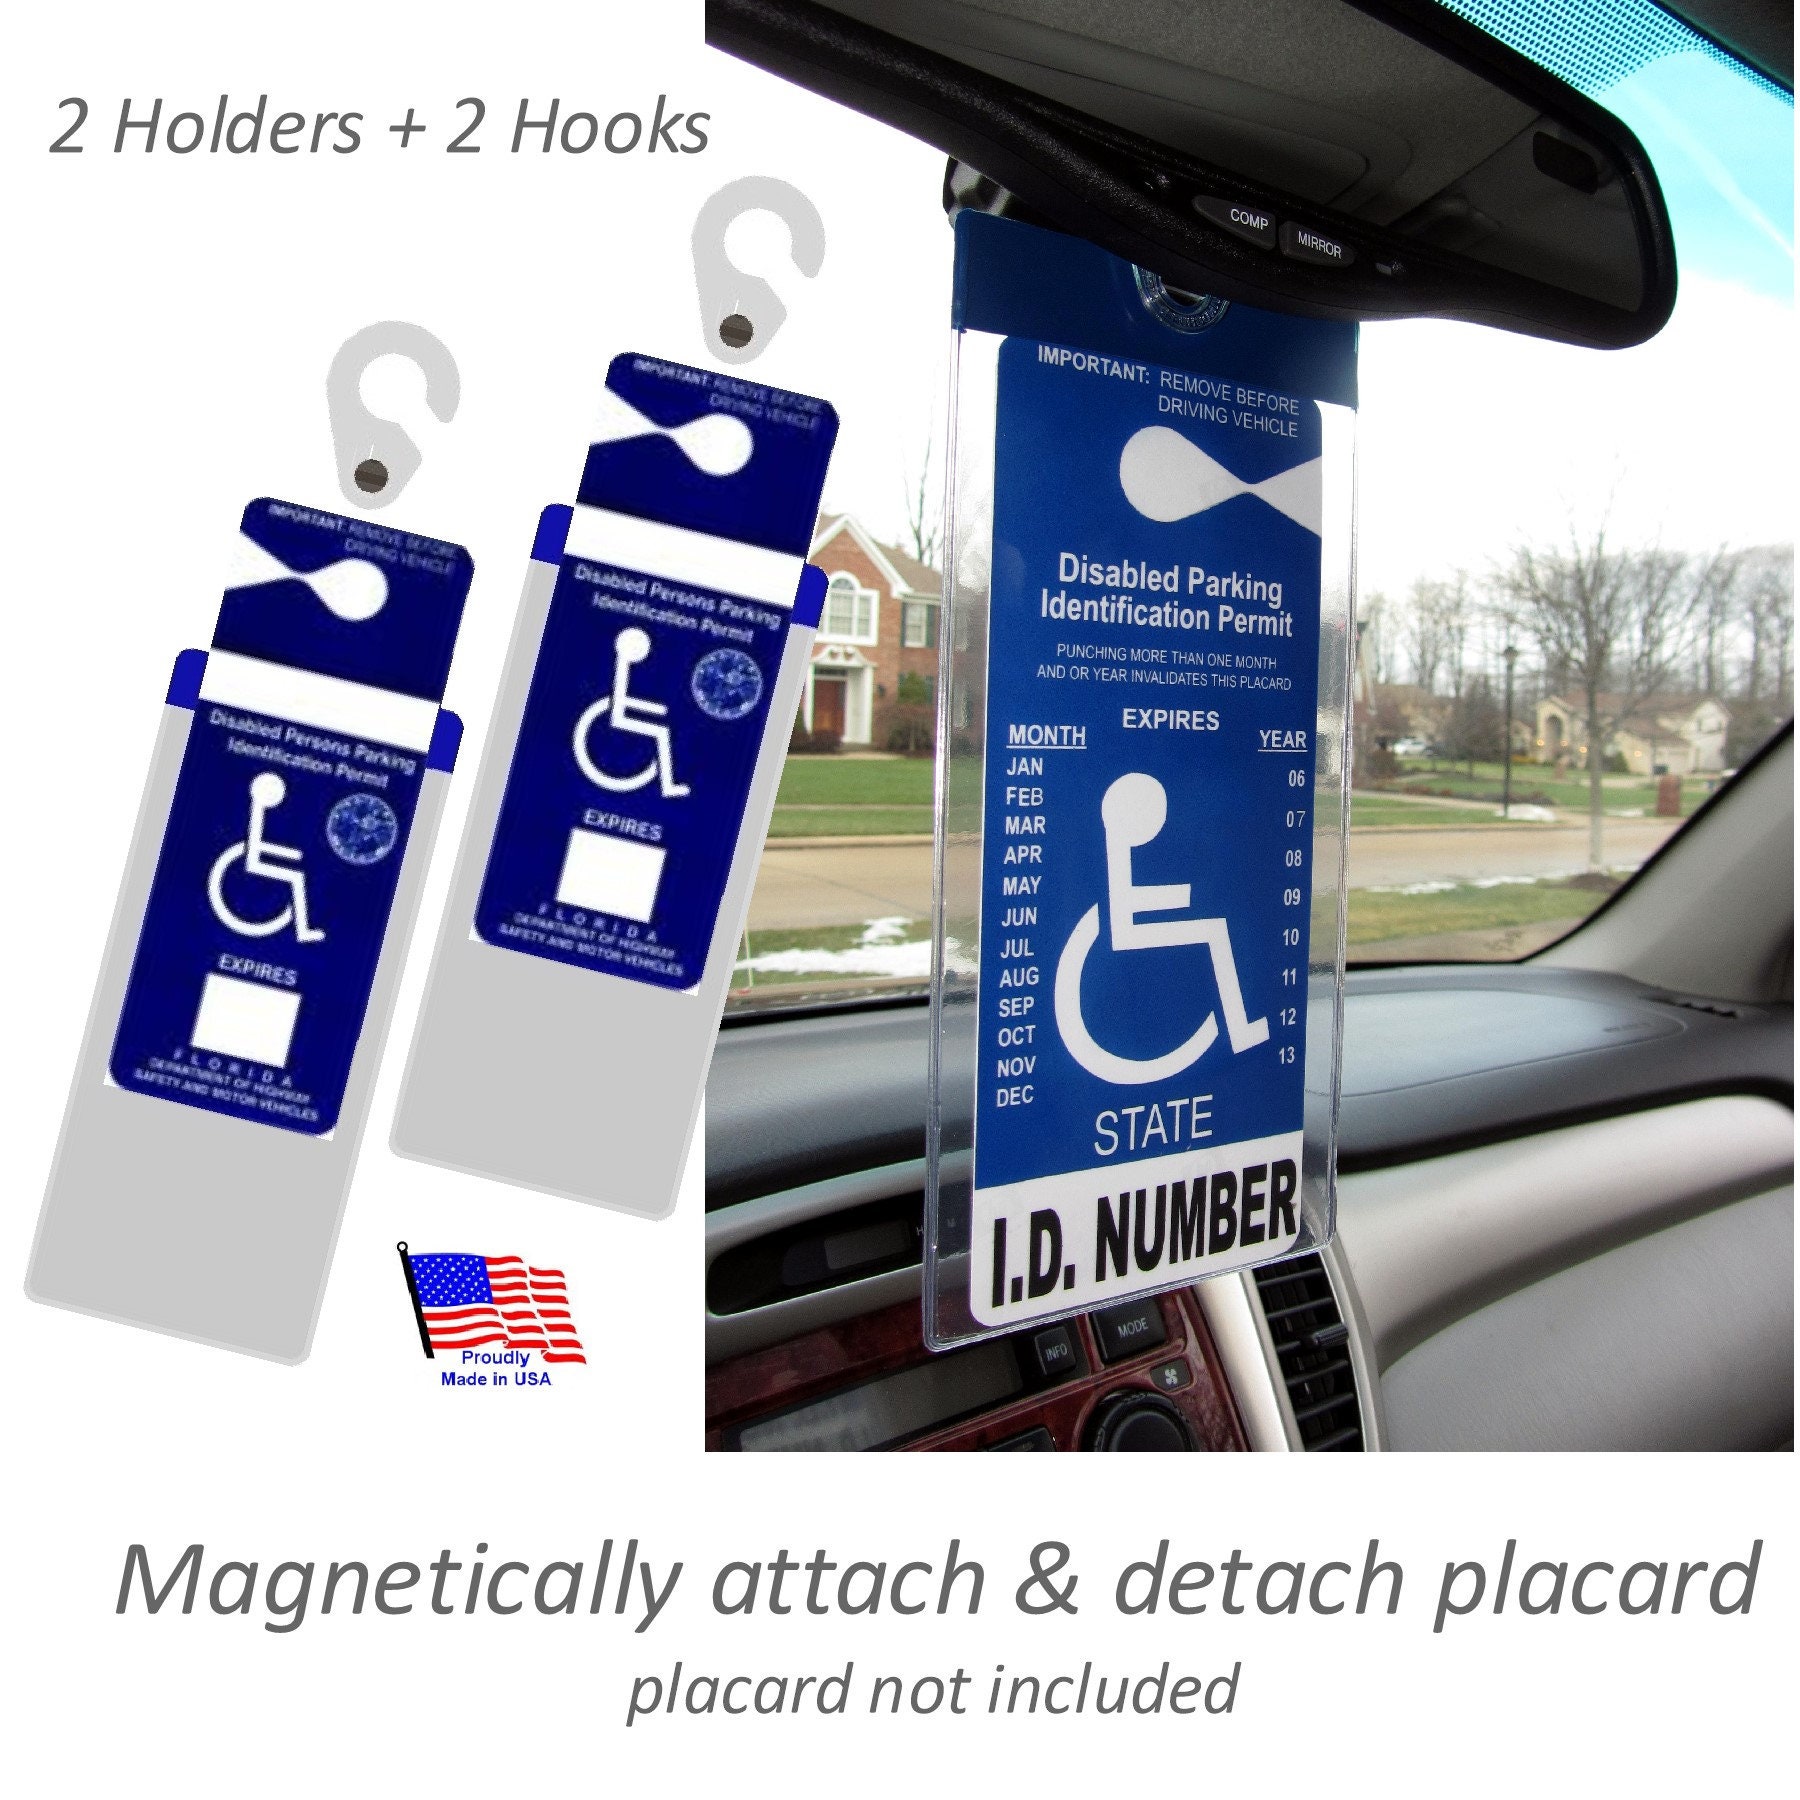 2 Mirortag Holders for Hadicap and All Parking Placard Permits.  Magnetically Attach & Detatch Your Permit With Your Eyes Closed. Made in USA  